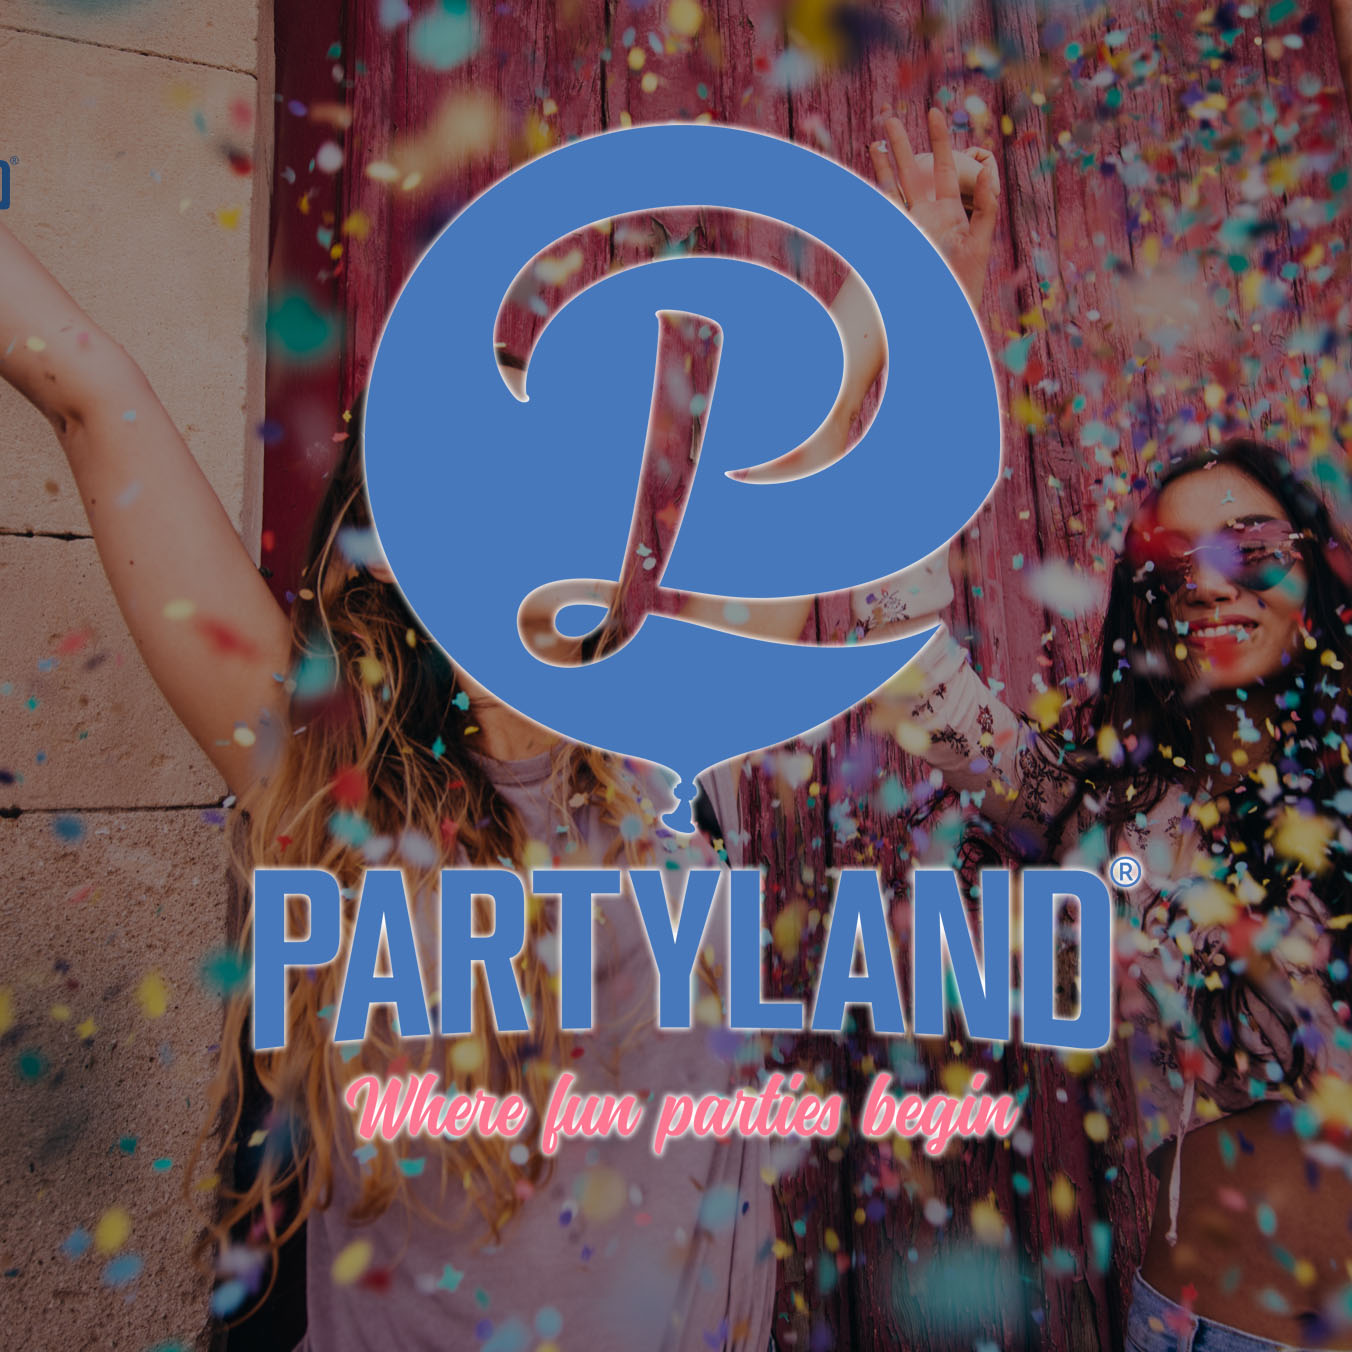 Partyland Loyalty